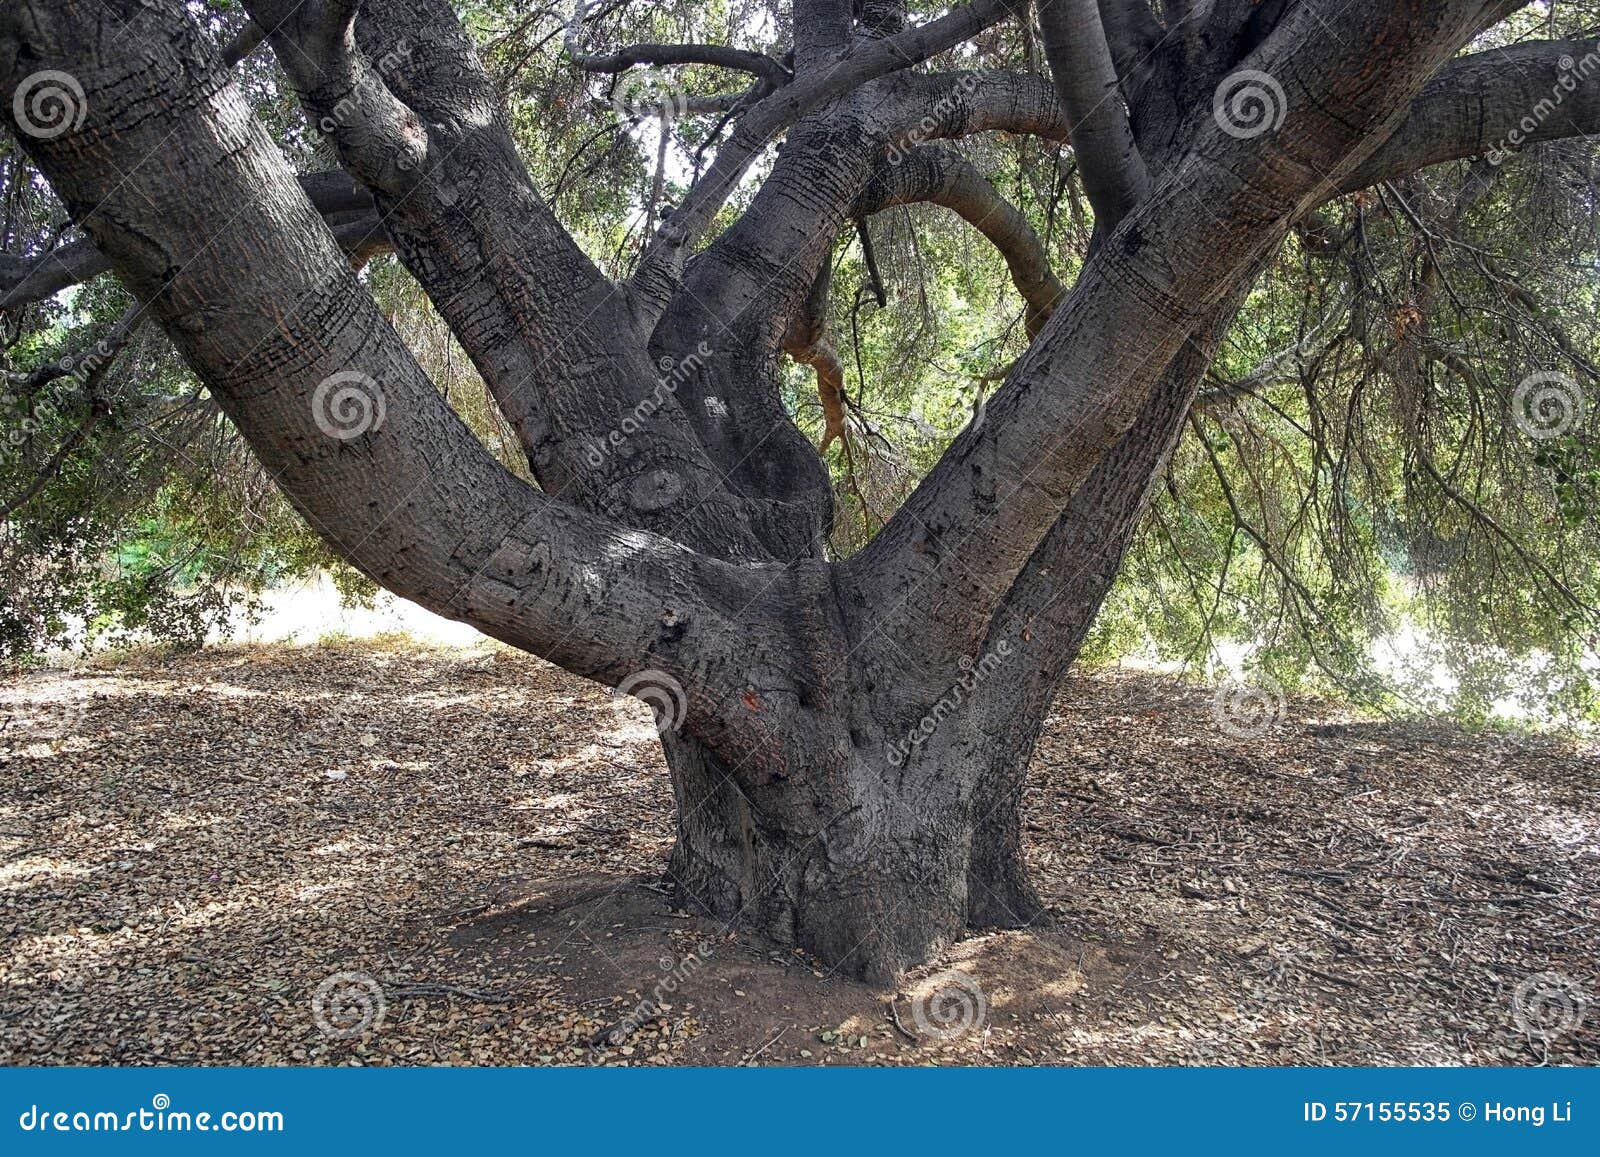 Under the Branches of a Mysterious Ancient Tree Stock Image - Image of